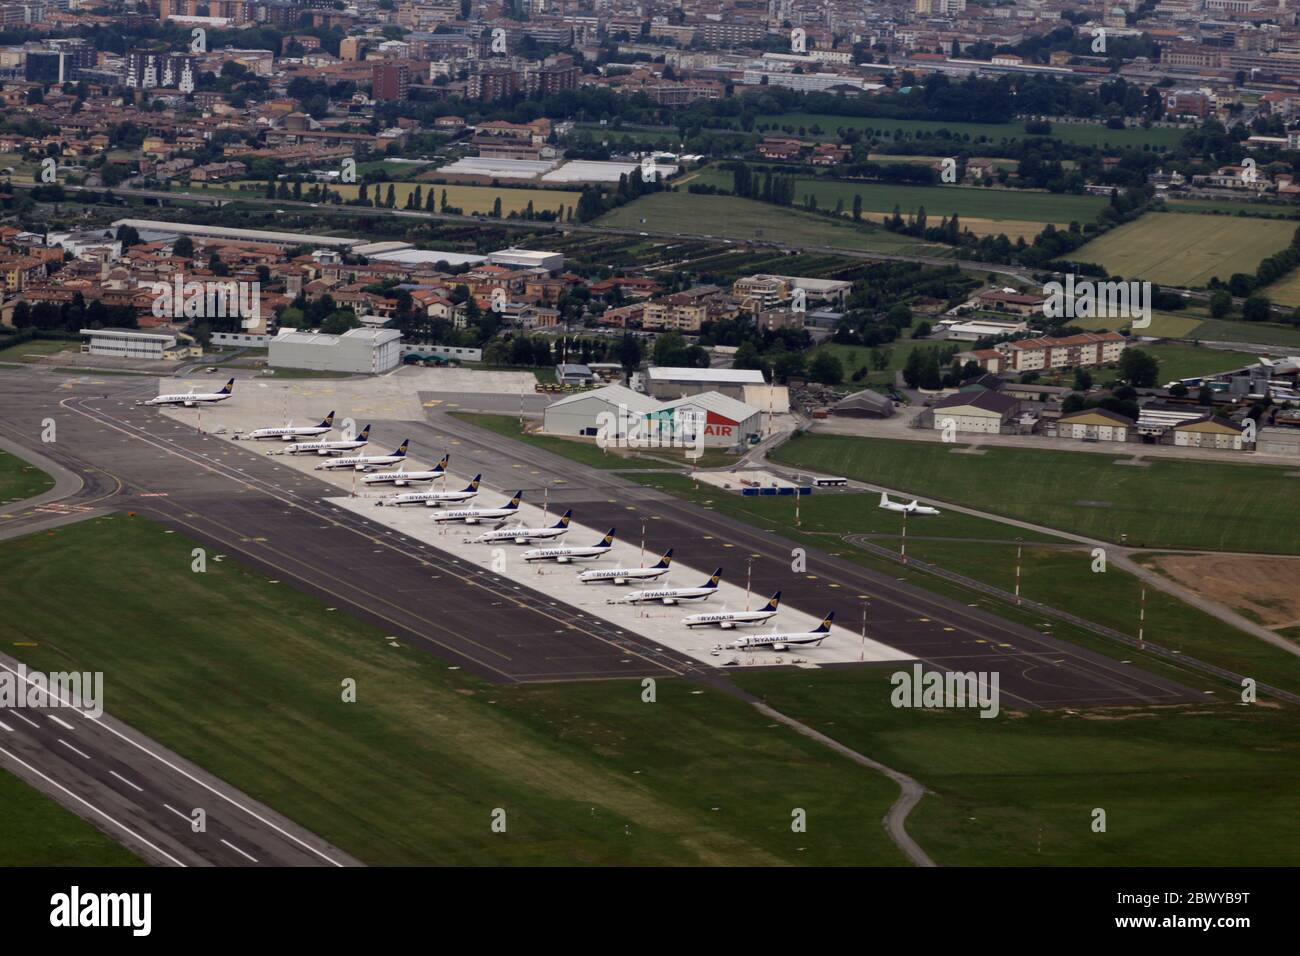 Aerial view of Bergamo airport, which is a Ryanair hub. Dozens of grounded  planes line up in Bergamo (LIME/BGY) International Airport due to lockdown  measures for coronavirus 2019. The airport itself closed